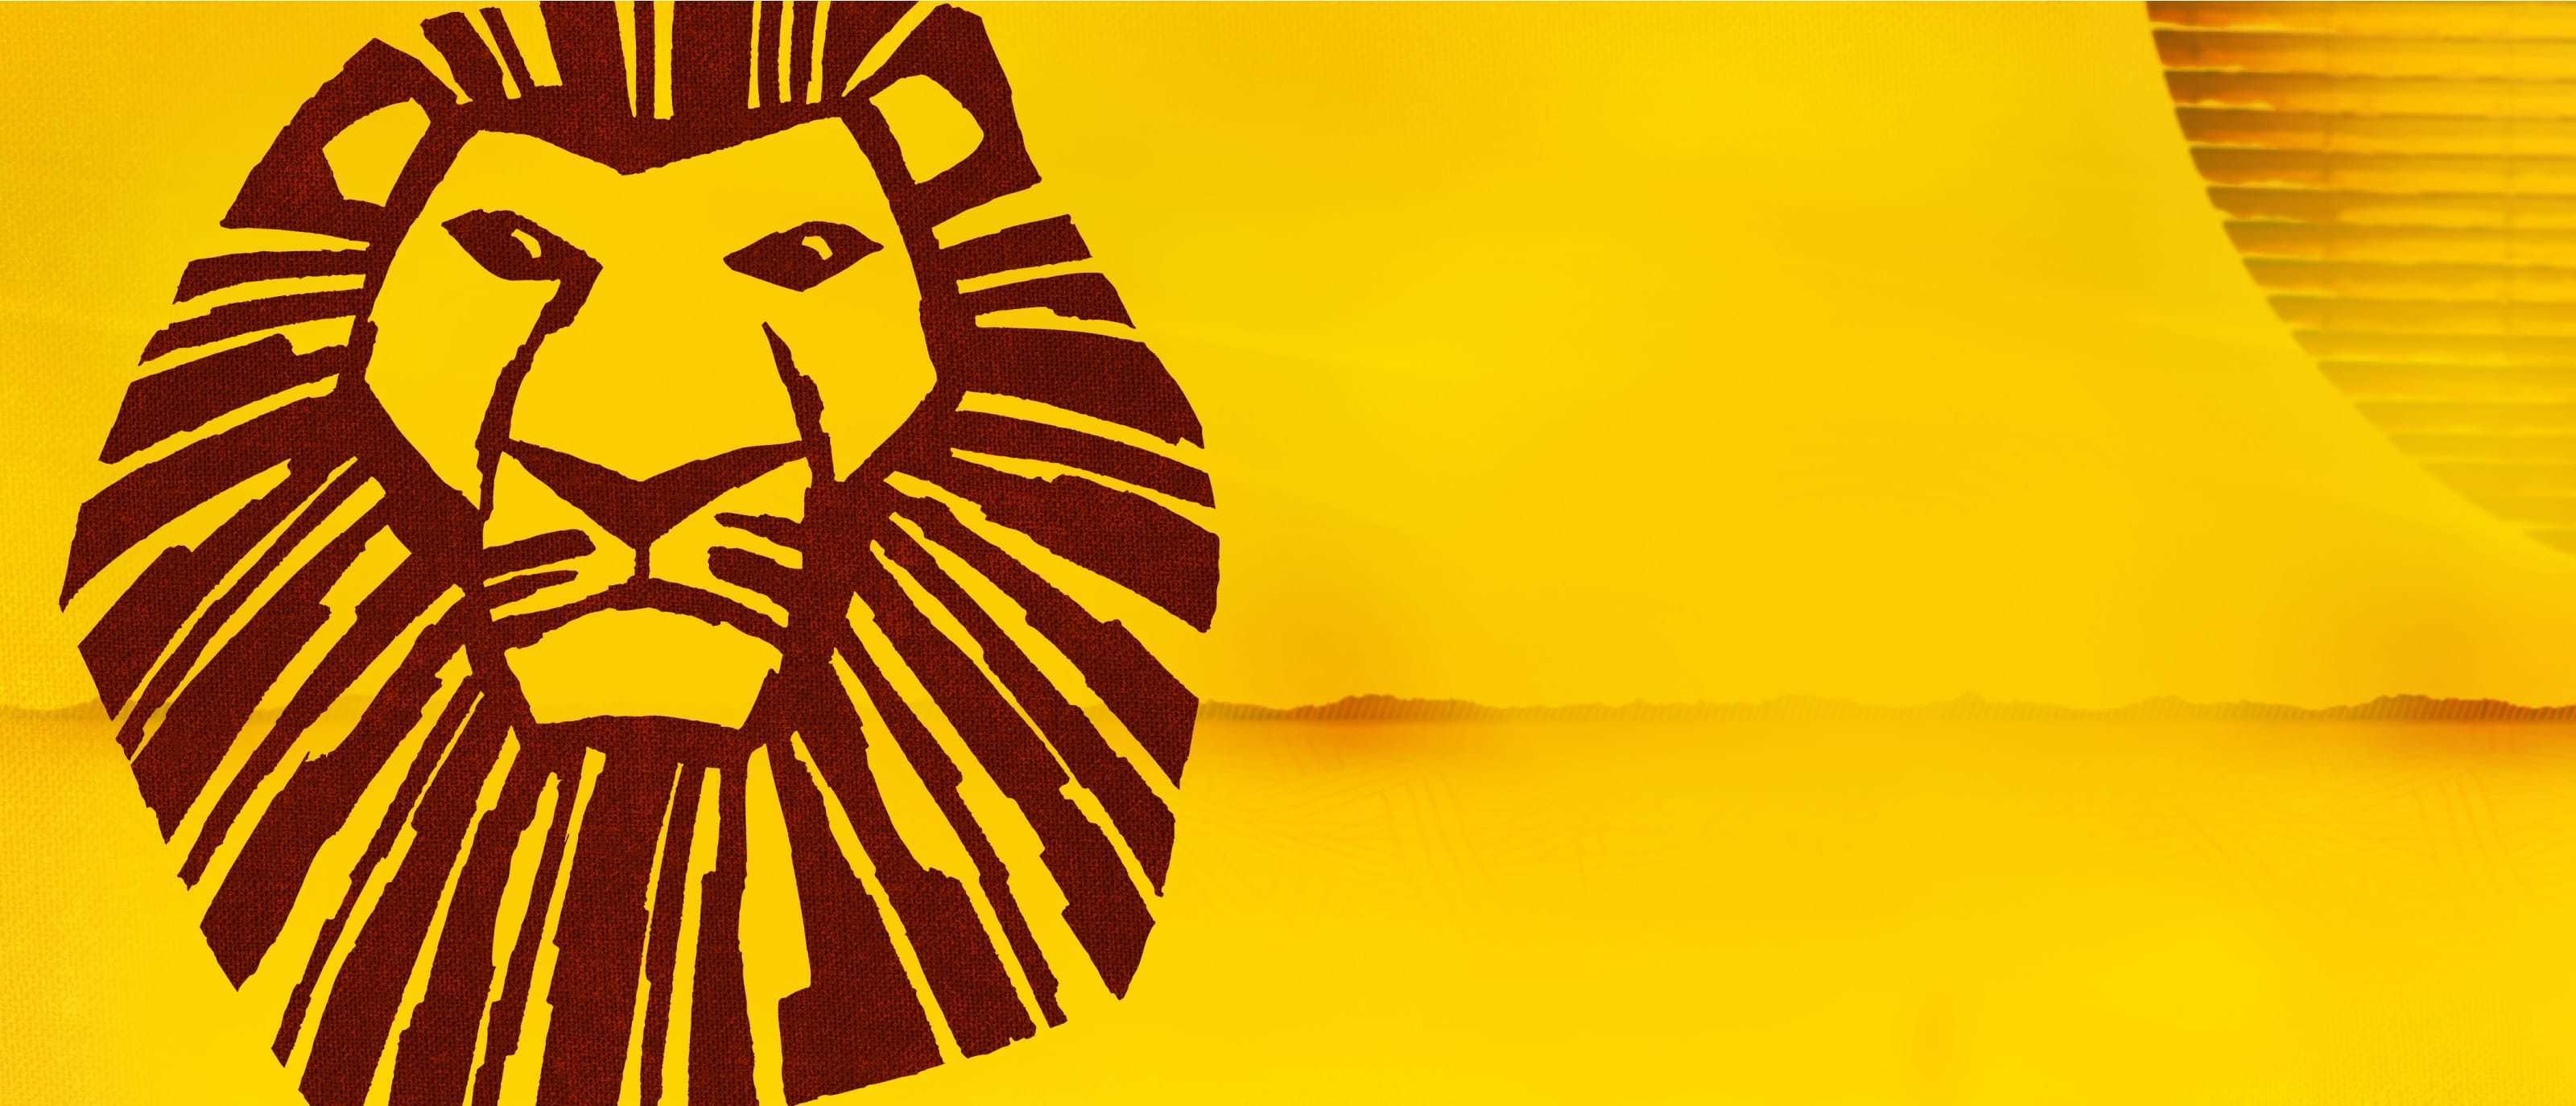 The Lion King Musical in London